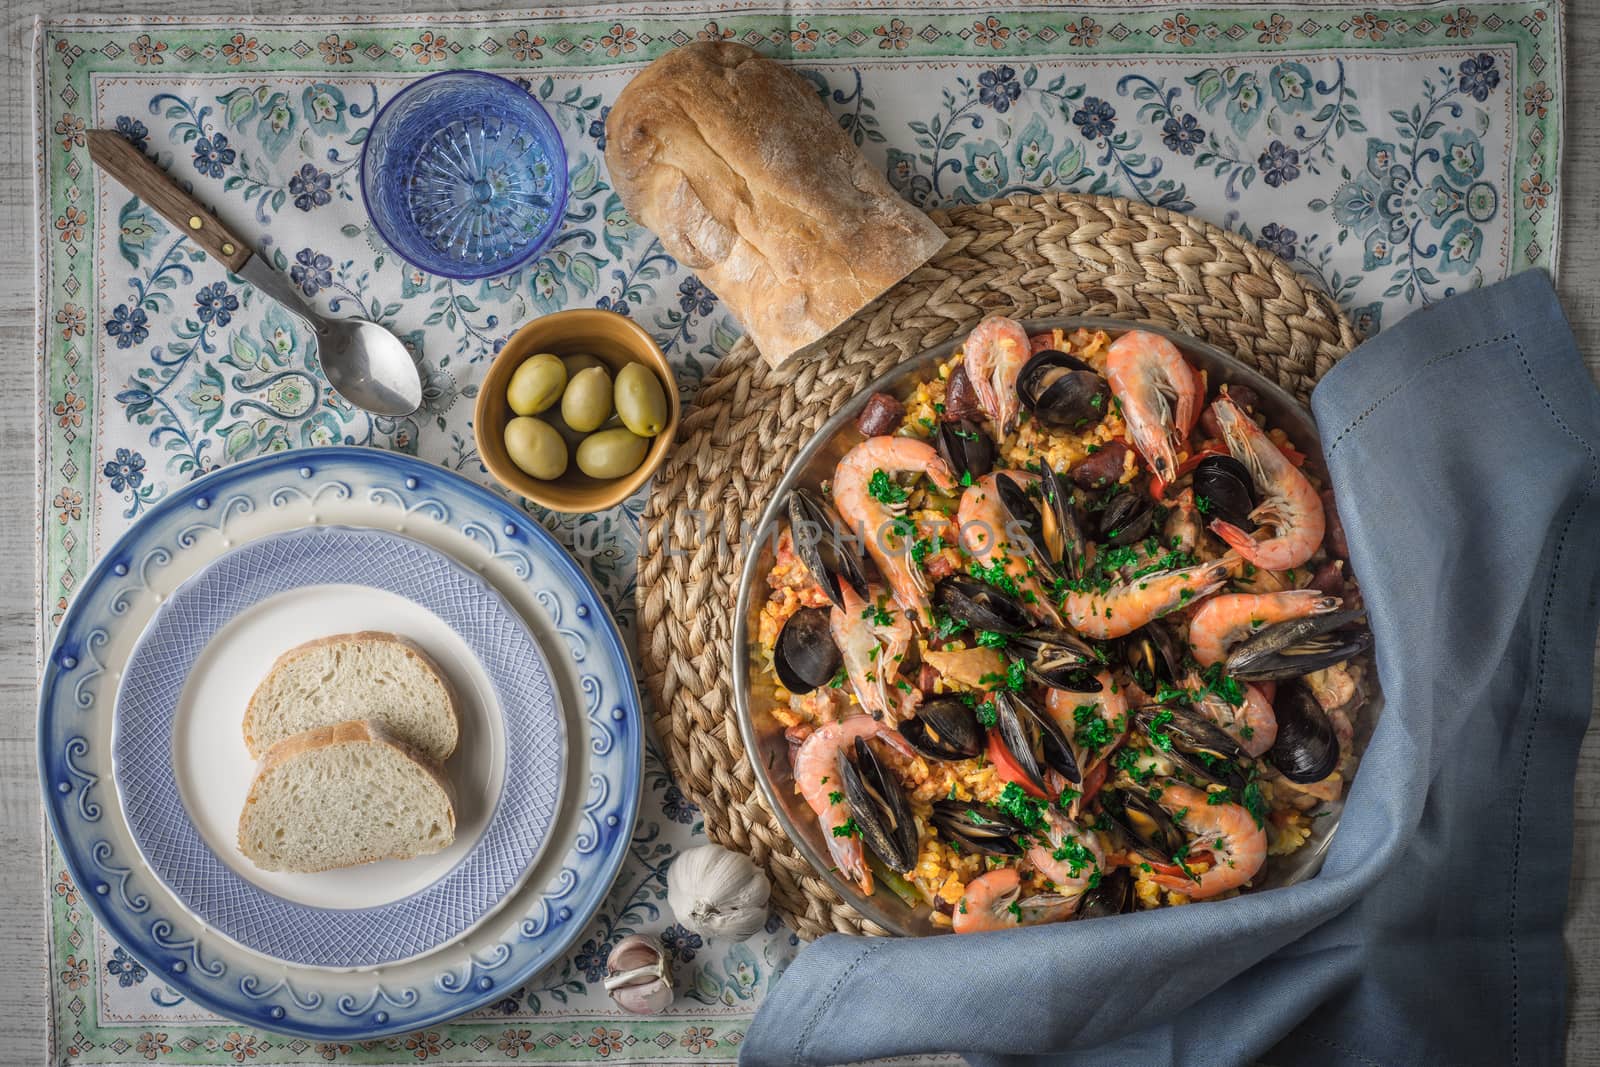 Paella on the metal plate on the beautiful napkin with tableware and bread top viewAC by Deniskarpenkov